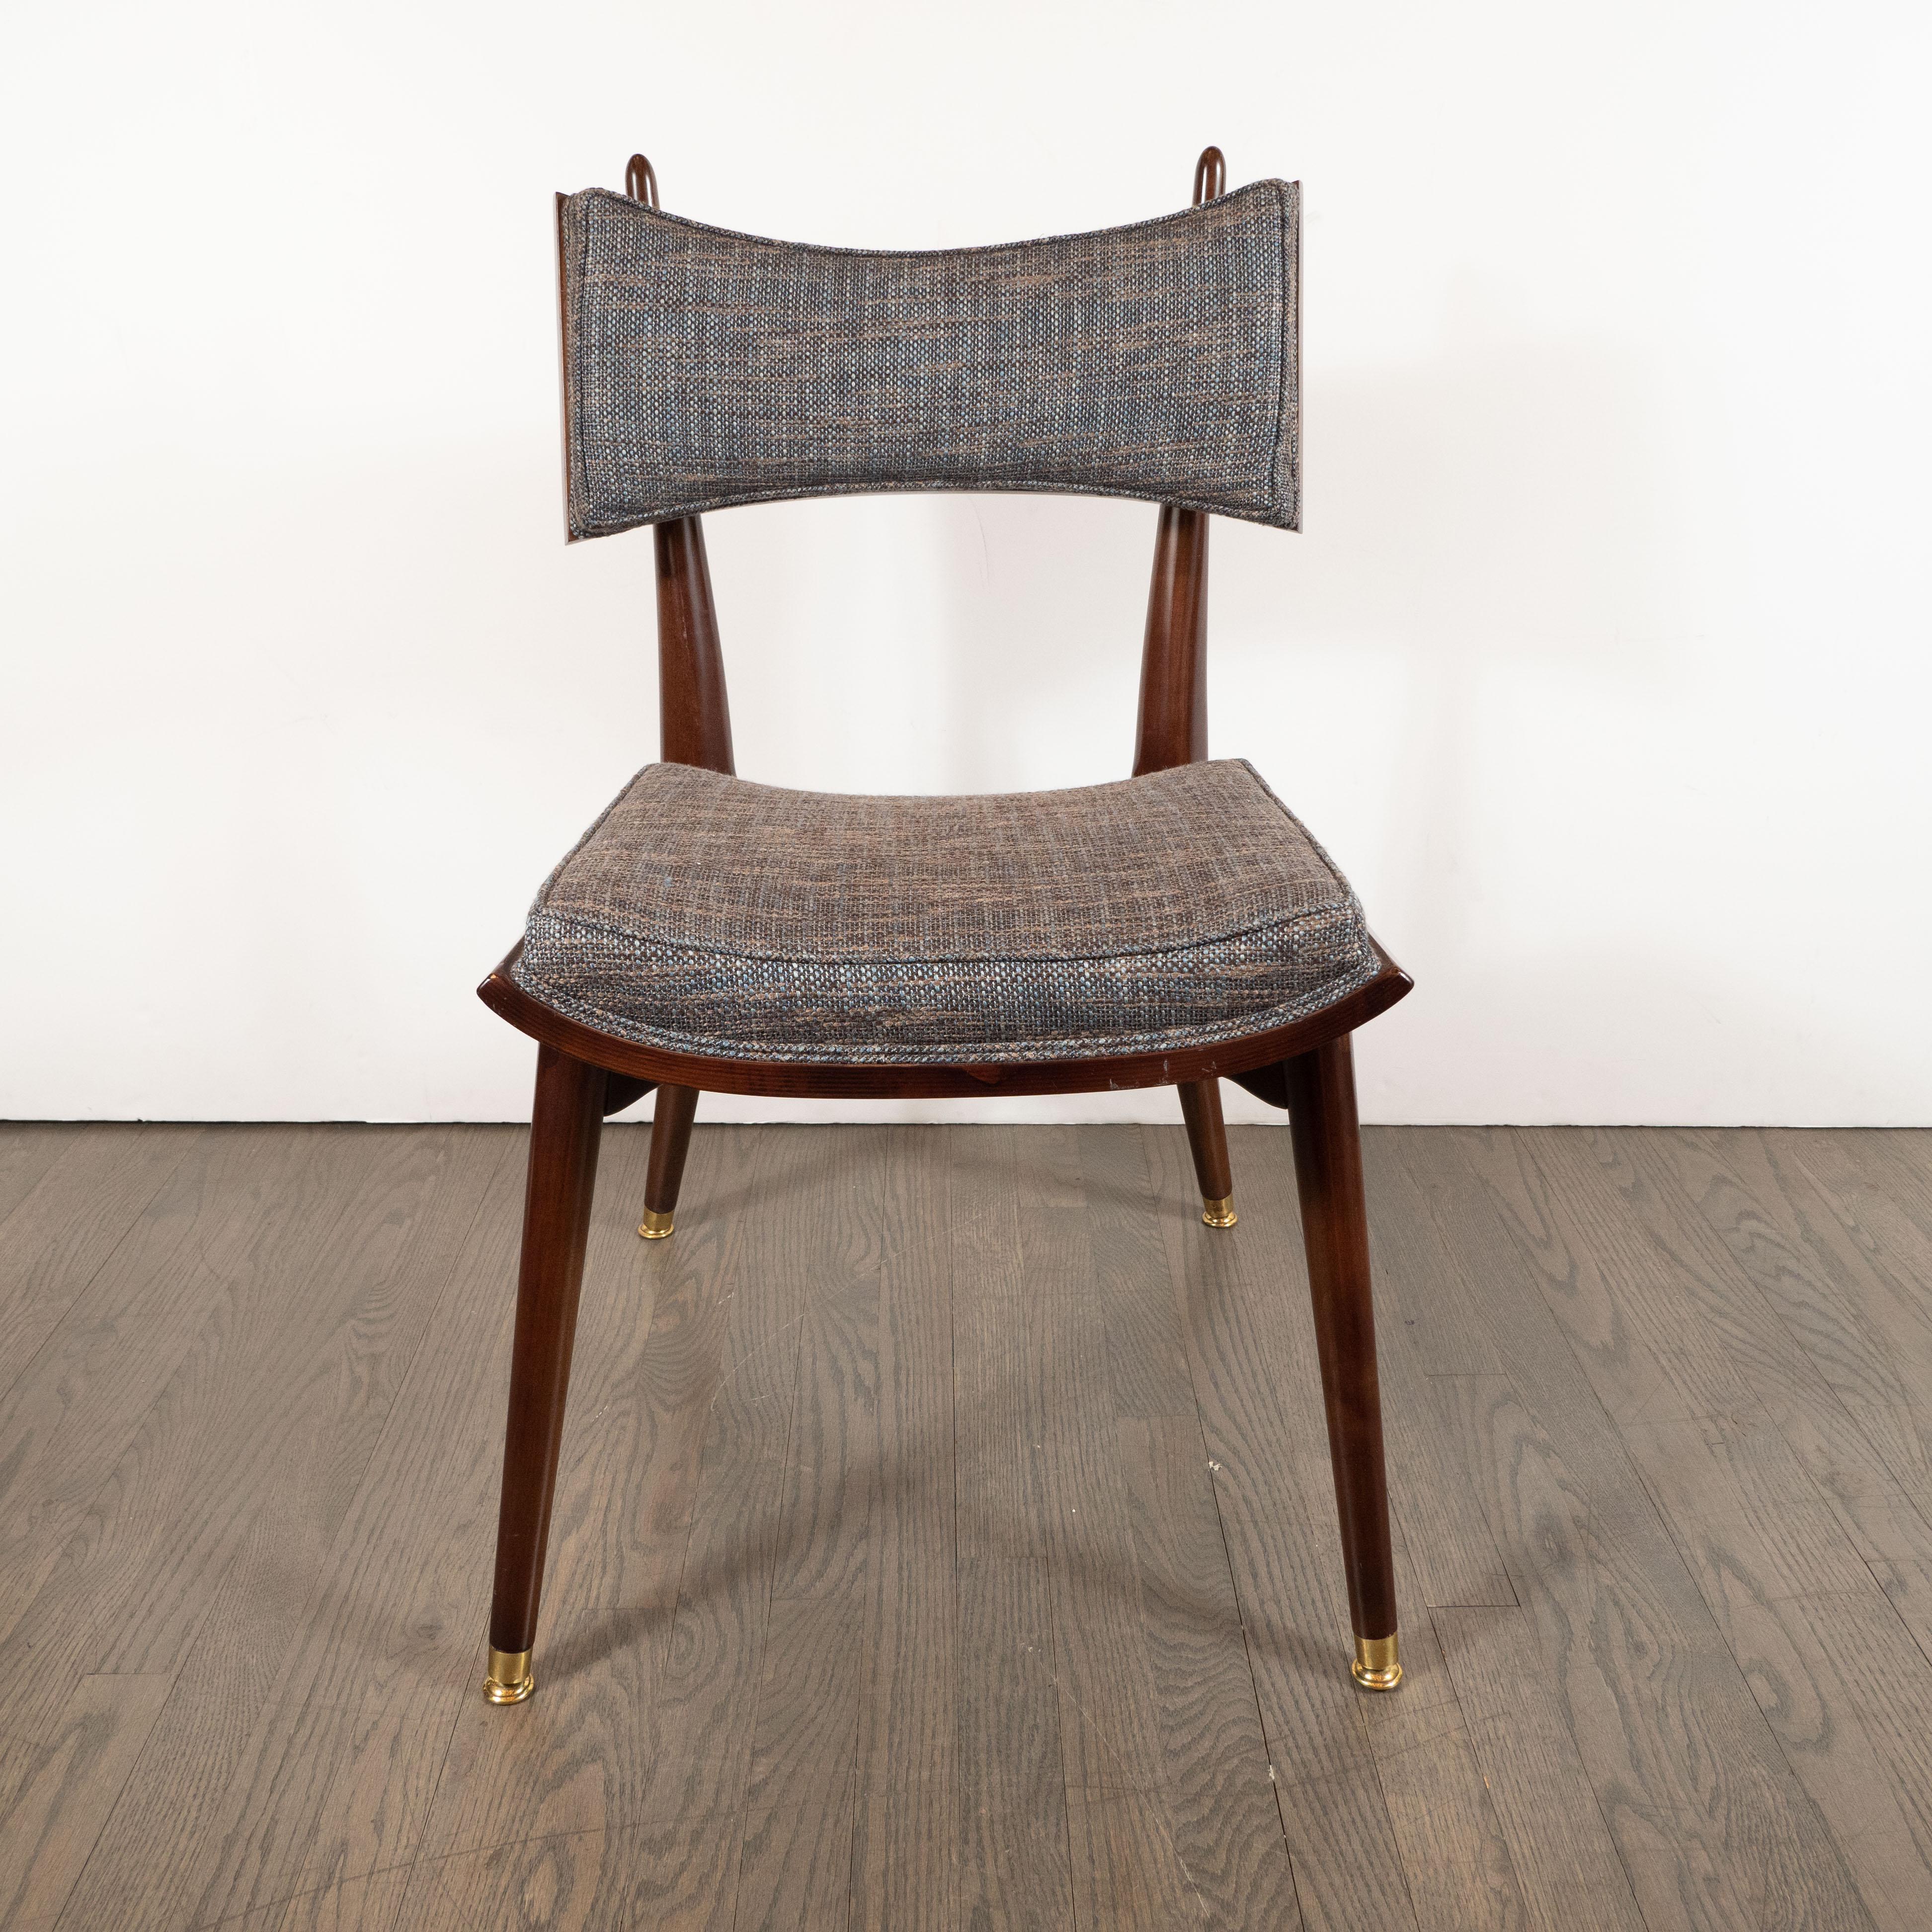 This rare and dramatic pair of side chairs were realized by the esteemed Mid-Century Modern Designer Harold Schwartz for the Romweber Furniture Co. in America, circa 1960. Handmade in handrubbed walnut with brass details throughout, these chairs